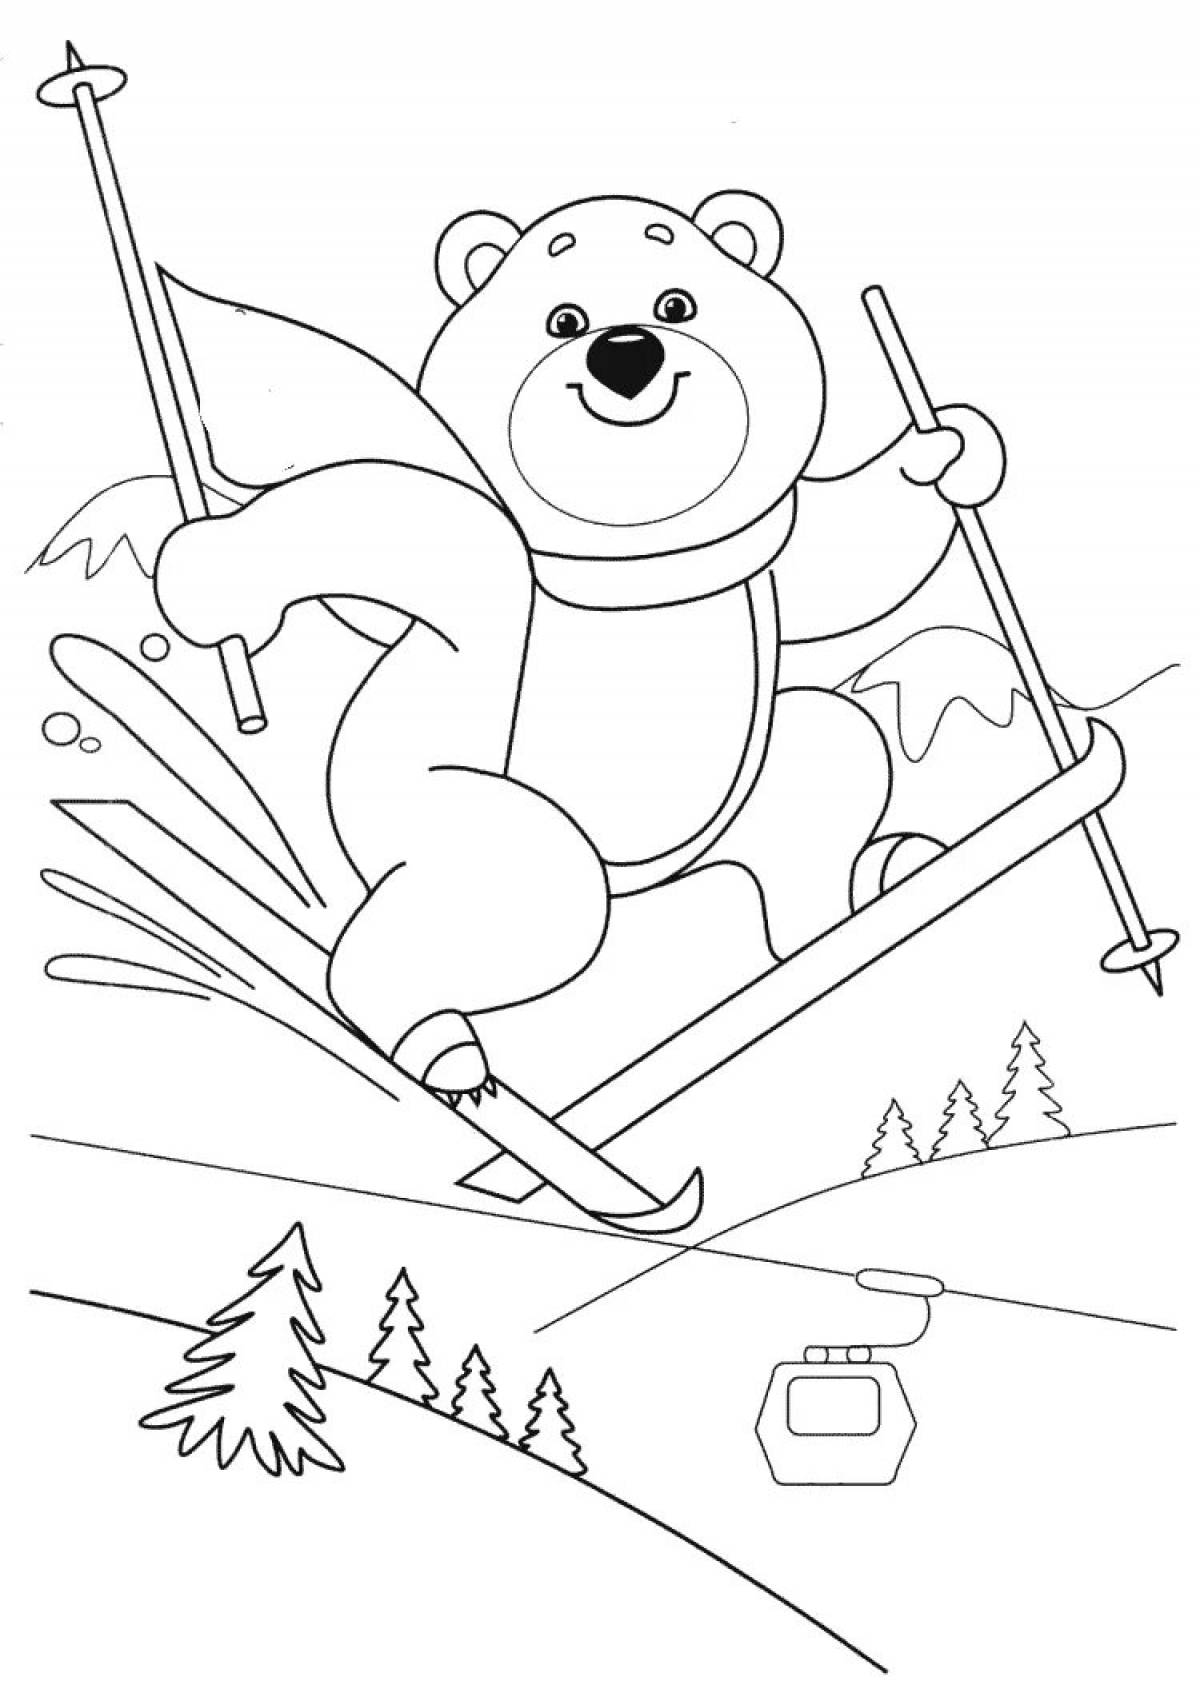 Coloring book cereal bear in winter